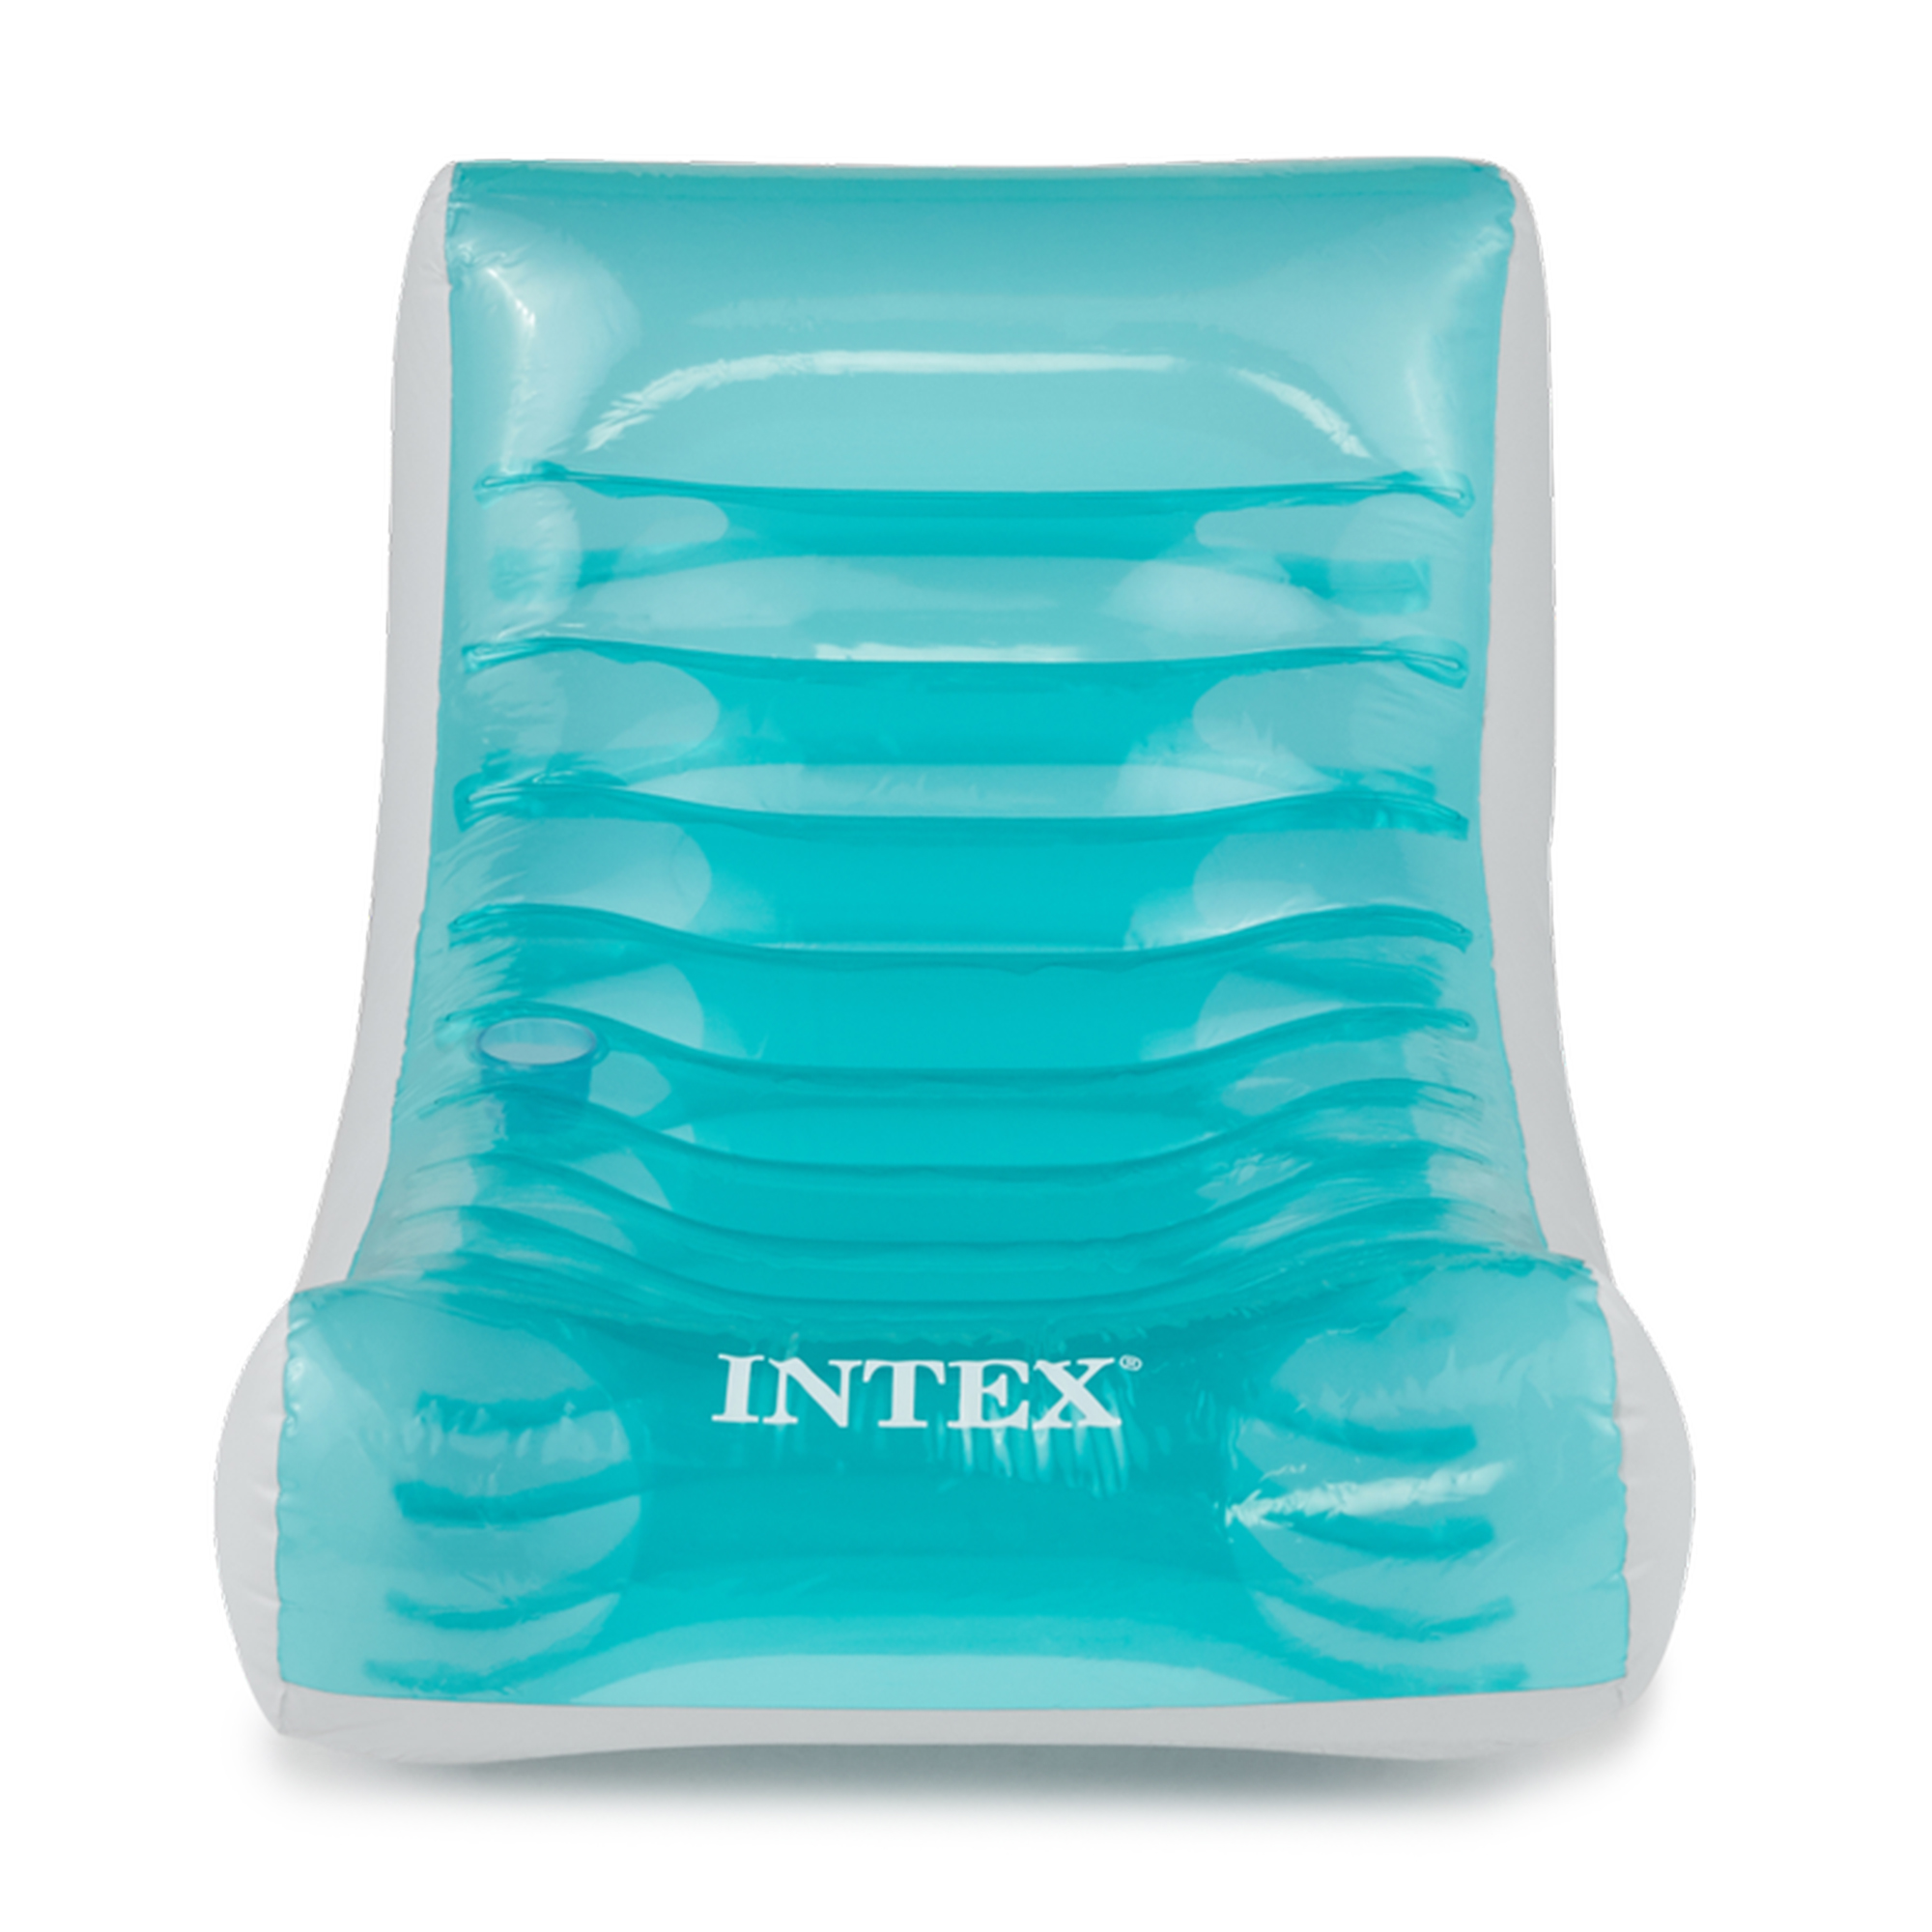 Intex Adult Transparent Blue  Inflatable Rockin' Lounge Swimming Pool Lounge Chair - image 3 of 6